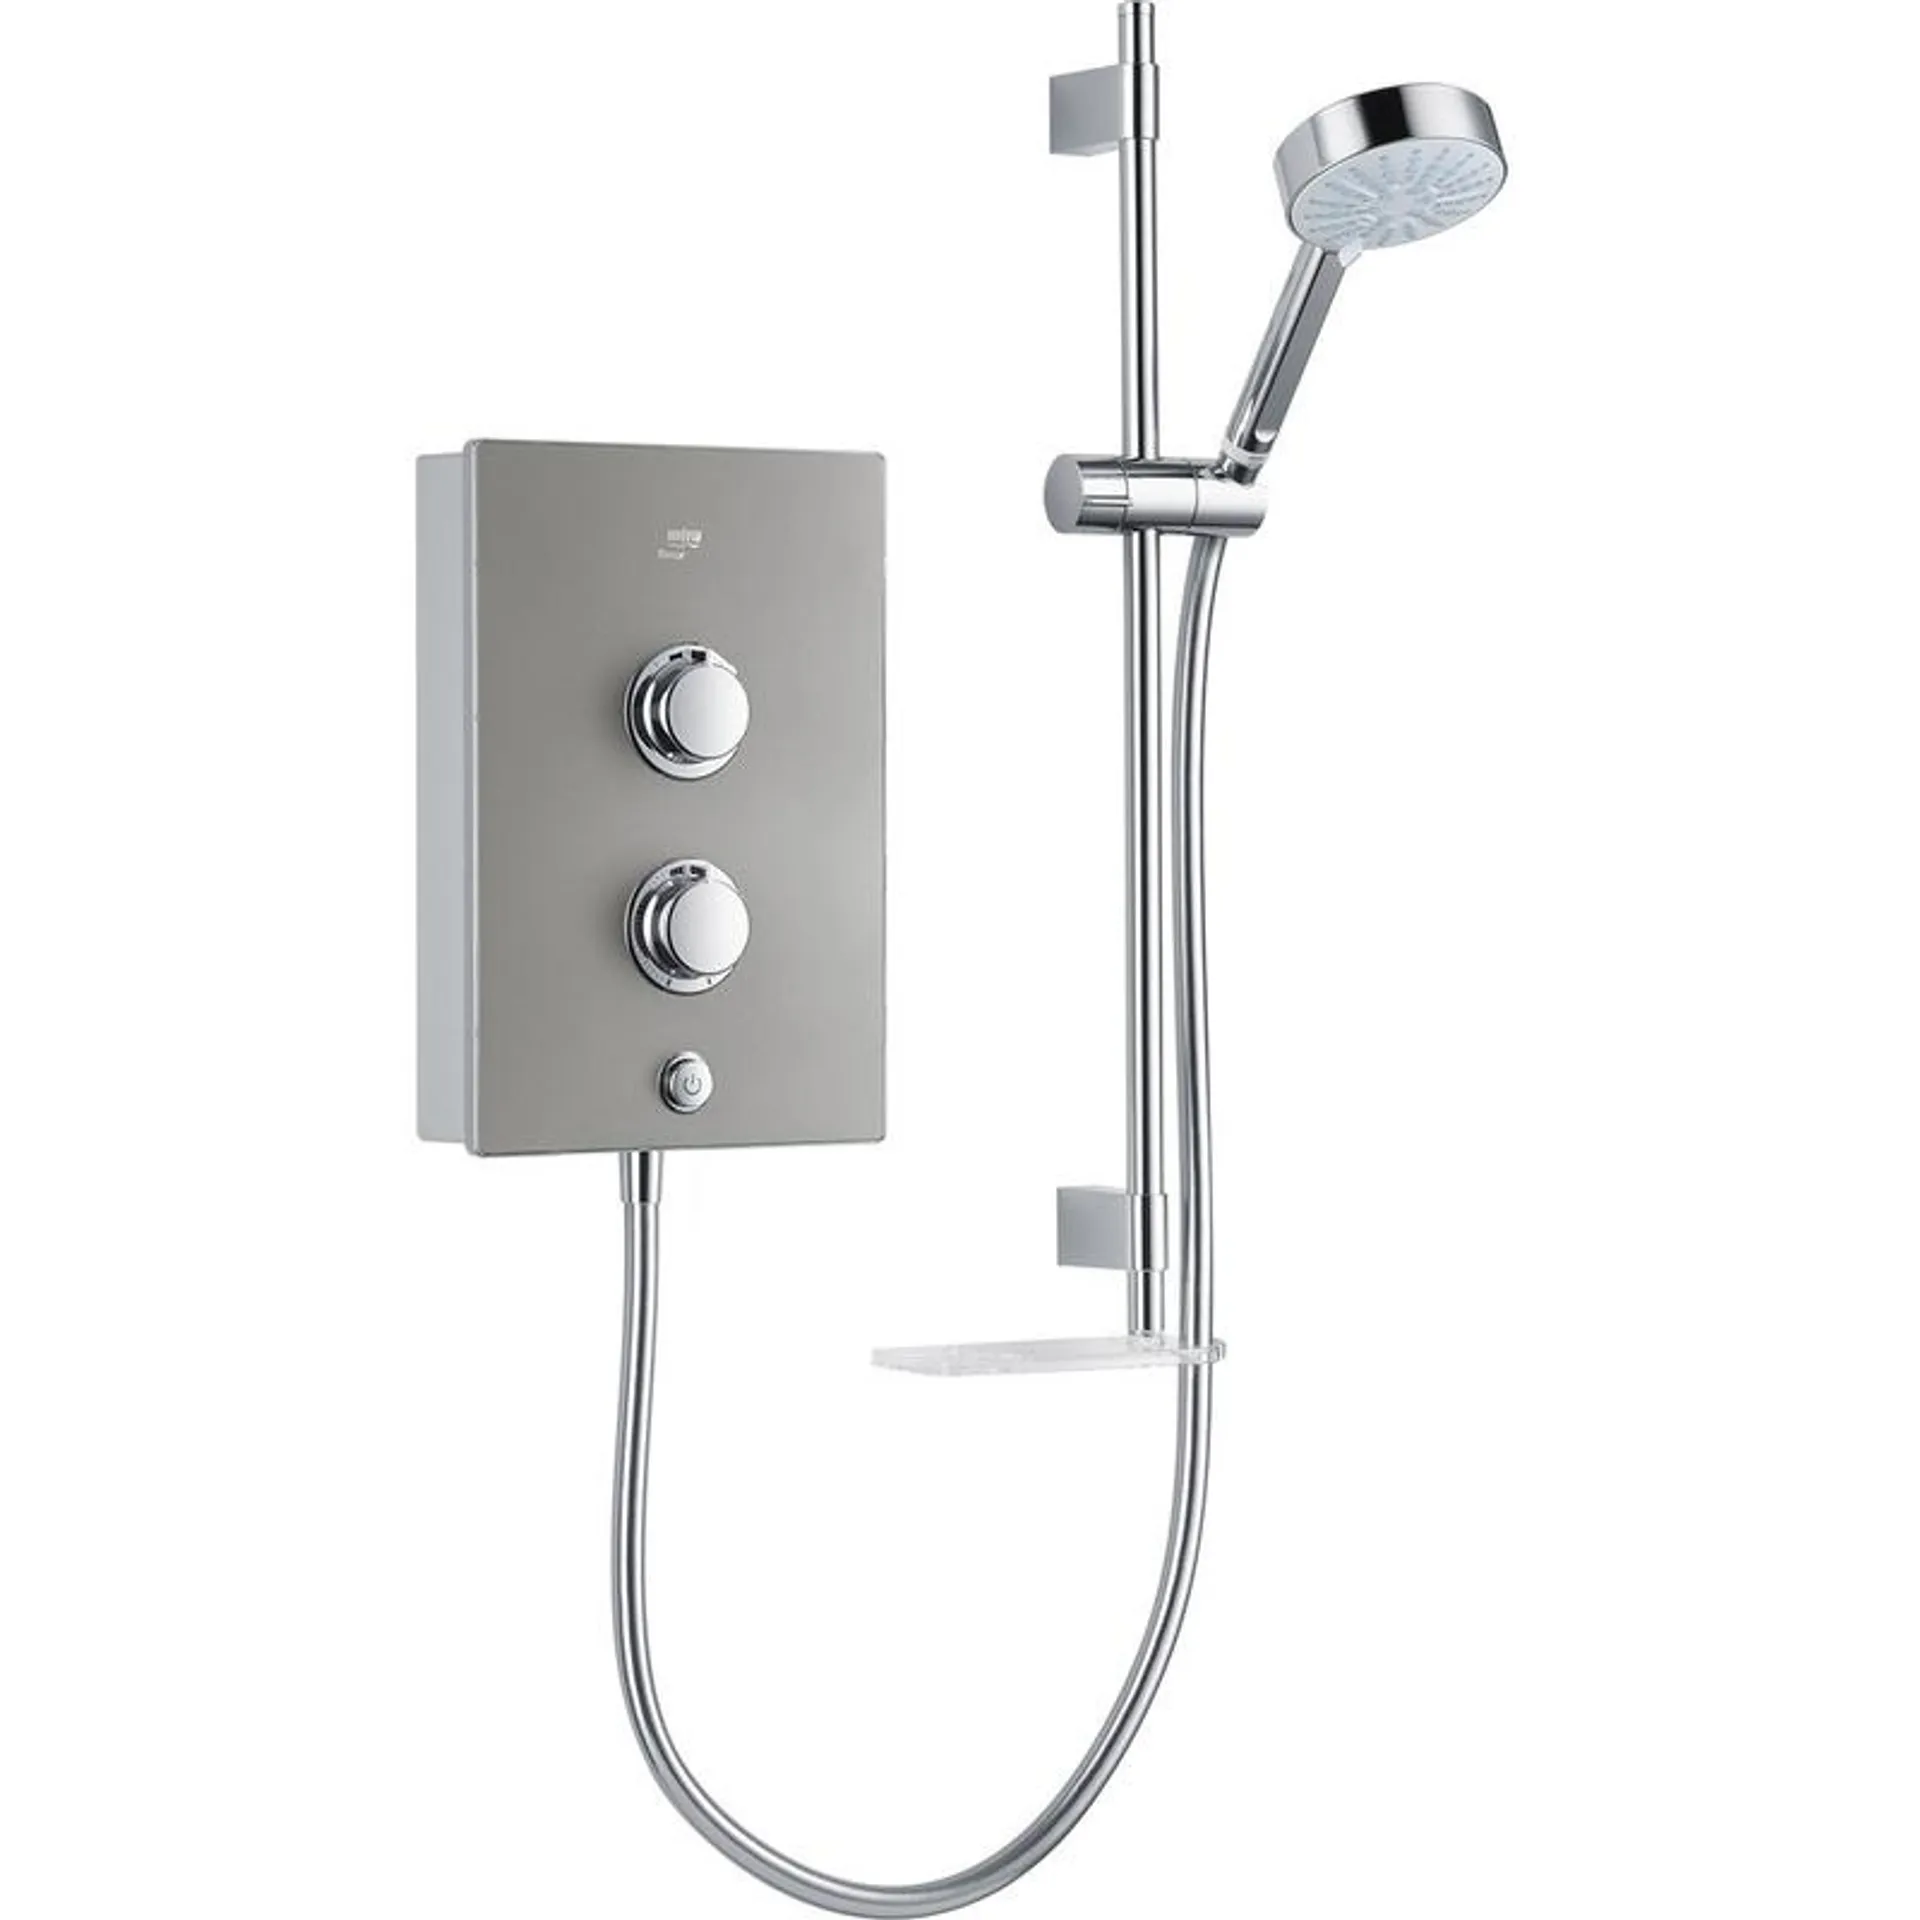 Mira Decor Electric Shower Silver 8.5kW